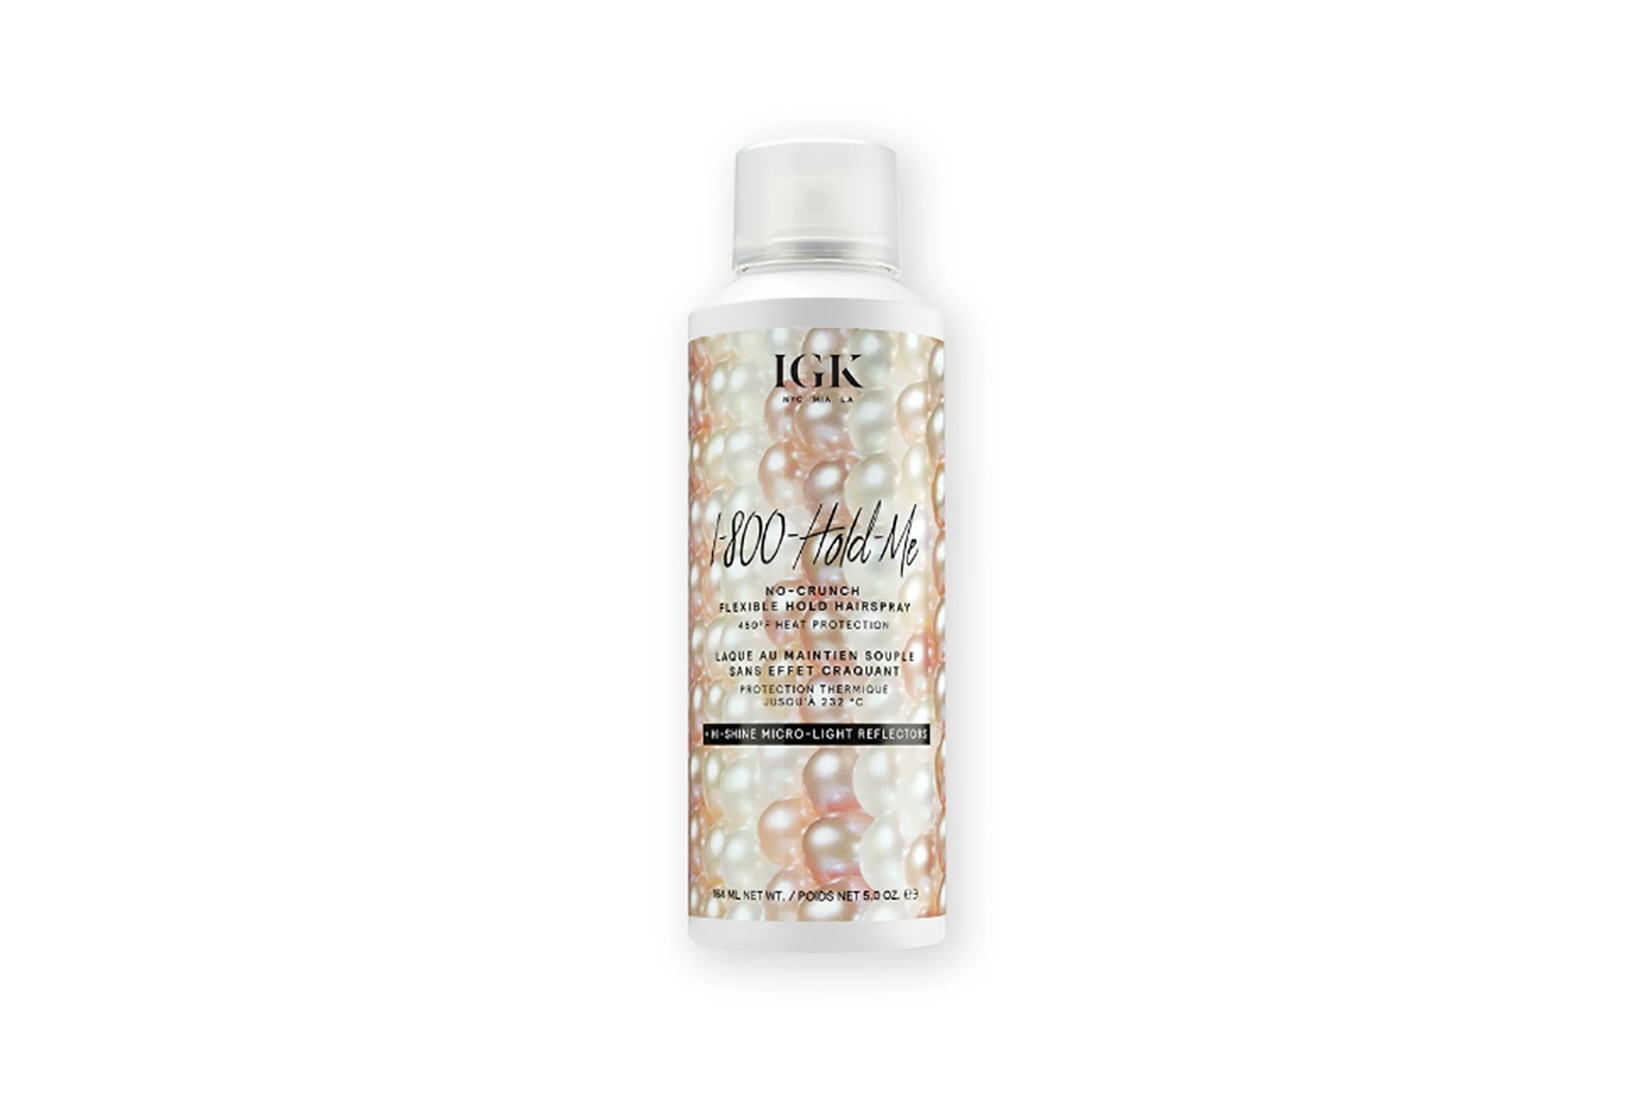 igk hair hairspray haircare shine glow brightening dewy 1 800 hold me no crunch flexible hold